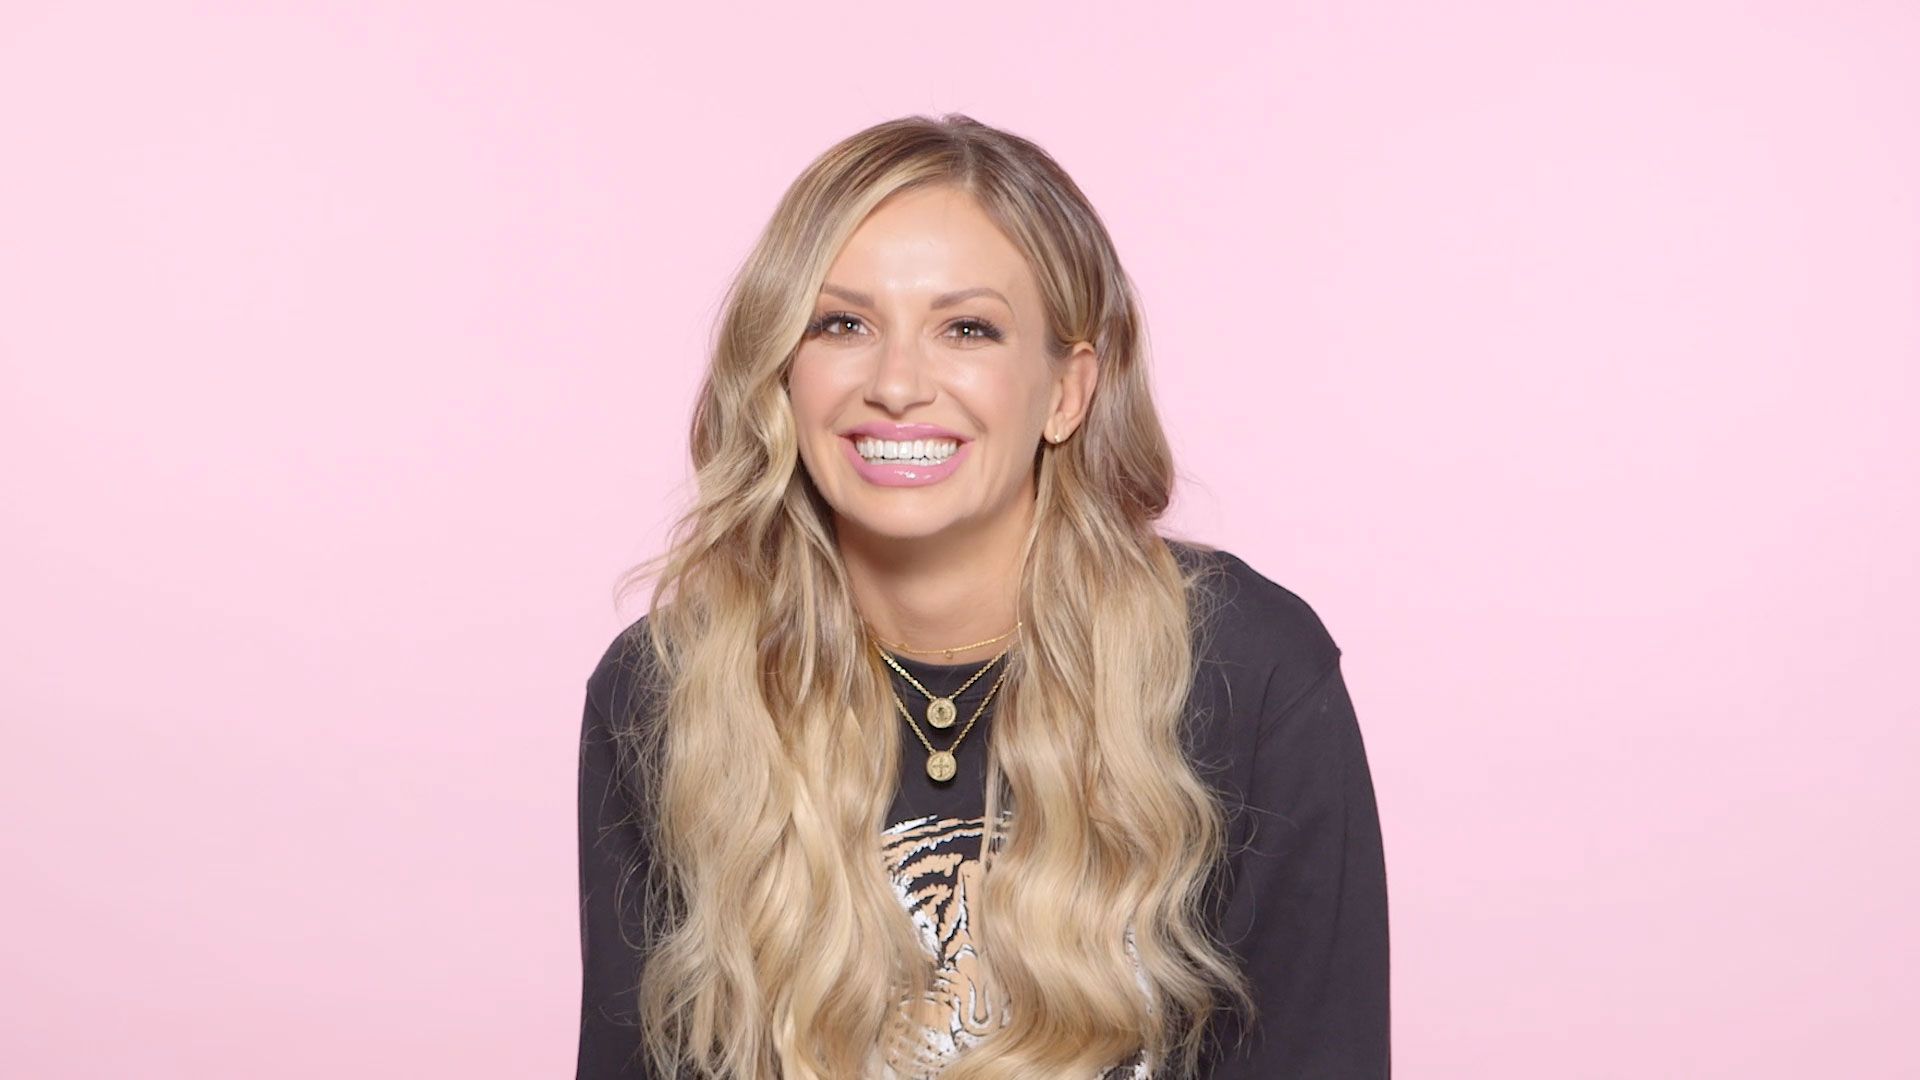 Carly Pearce Revealed That She Hated Kelsea Ballerini When They First Met